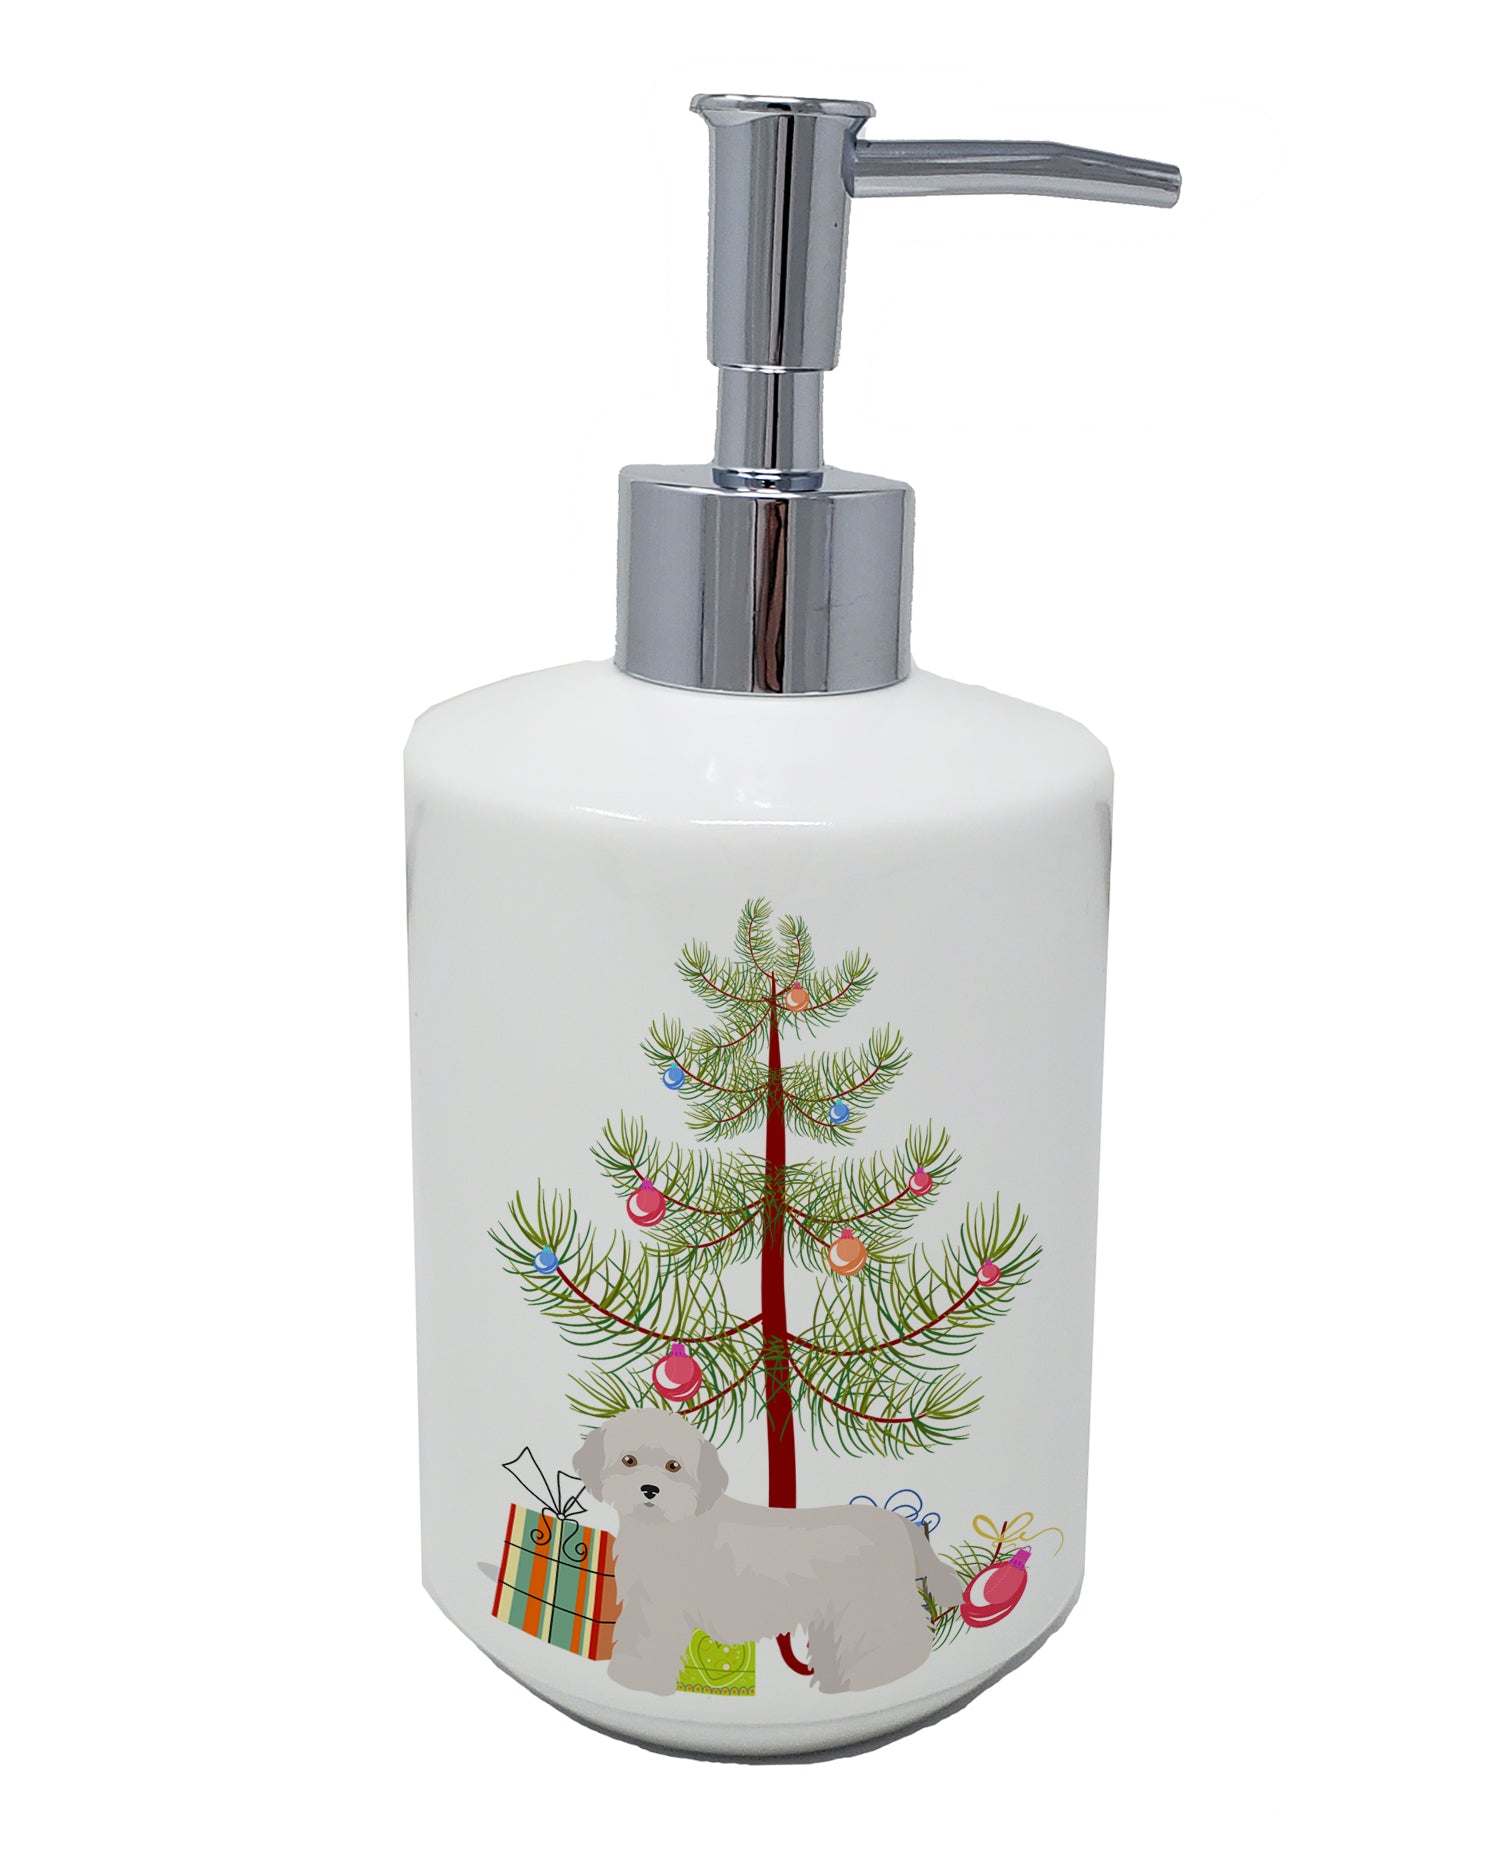 Buy this Cyprus Poodle Christmas Tree Ceramic Soap Dispenser